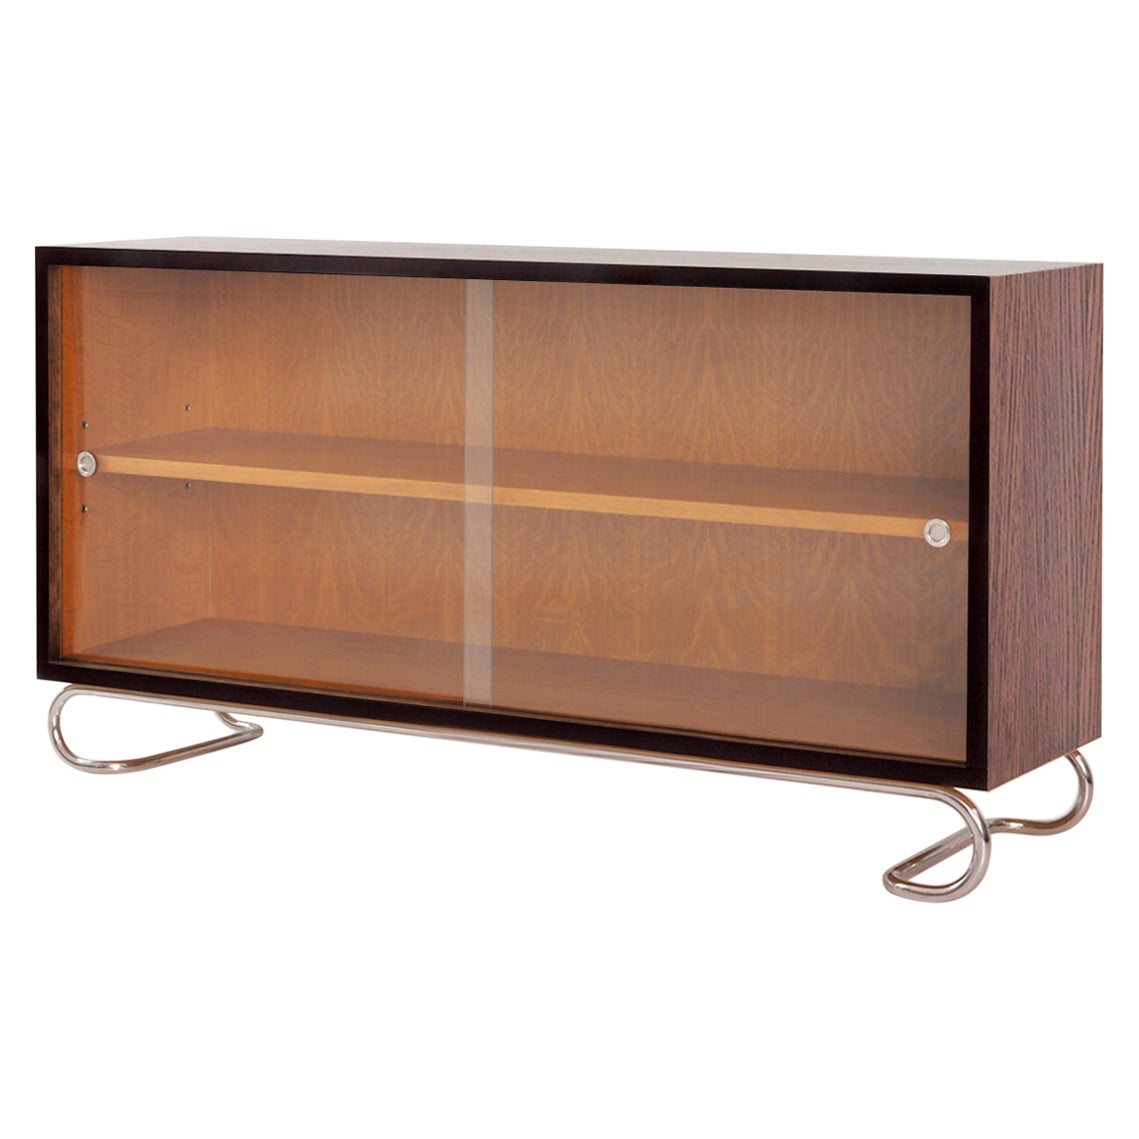 Bespoke Low Bookcase, Stained Wood, Sliding Glass Panels and Tubular Steel Base For Sale